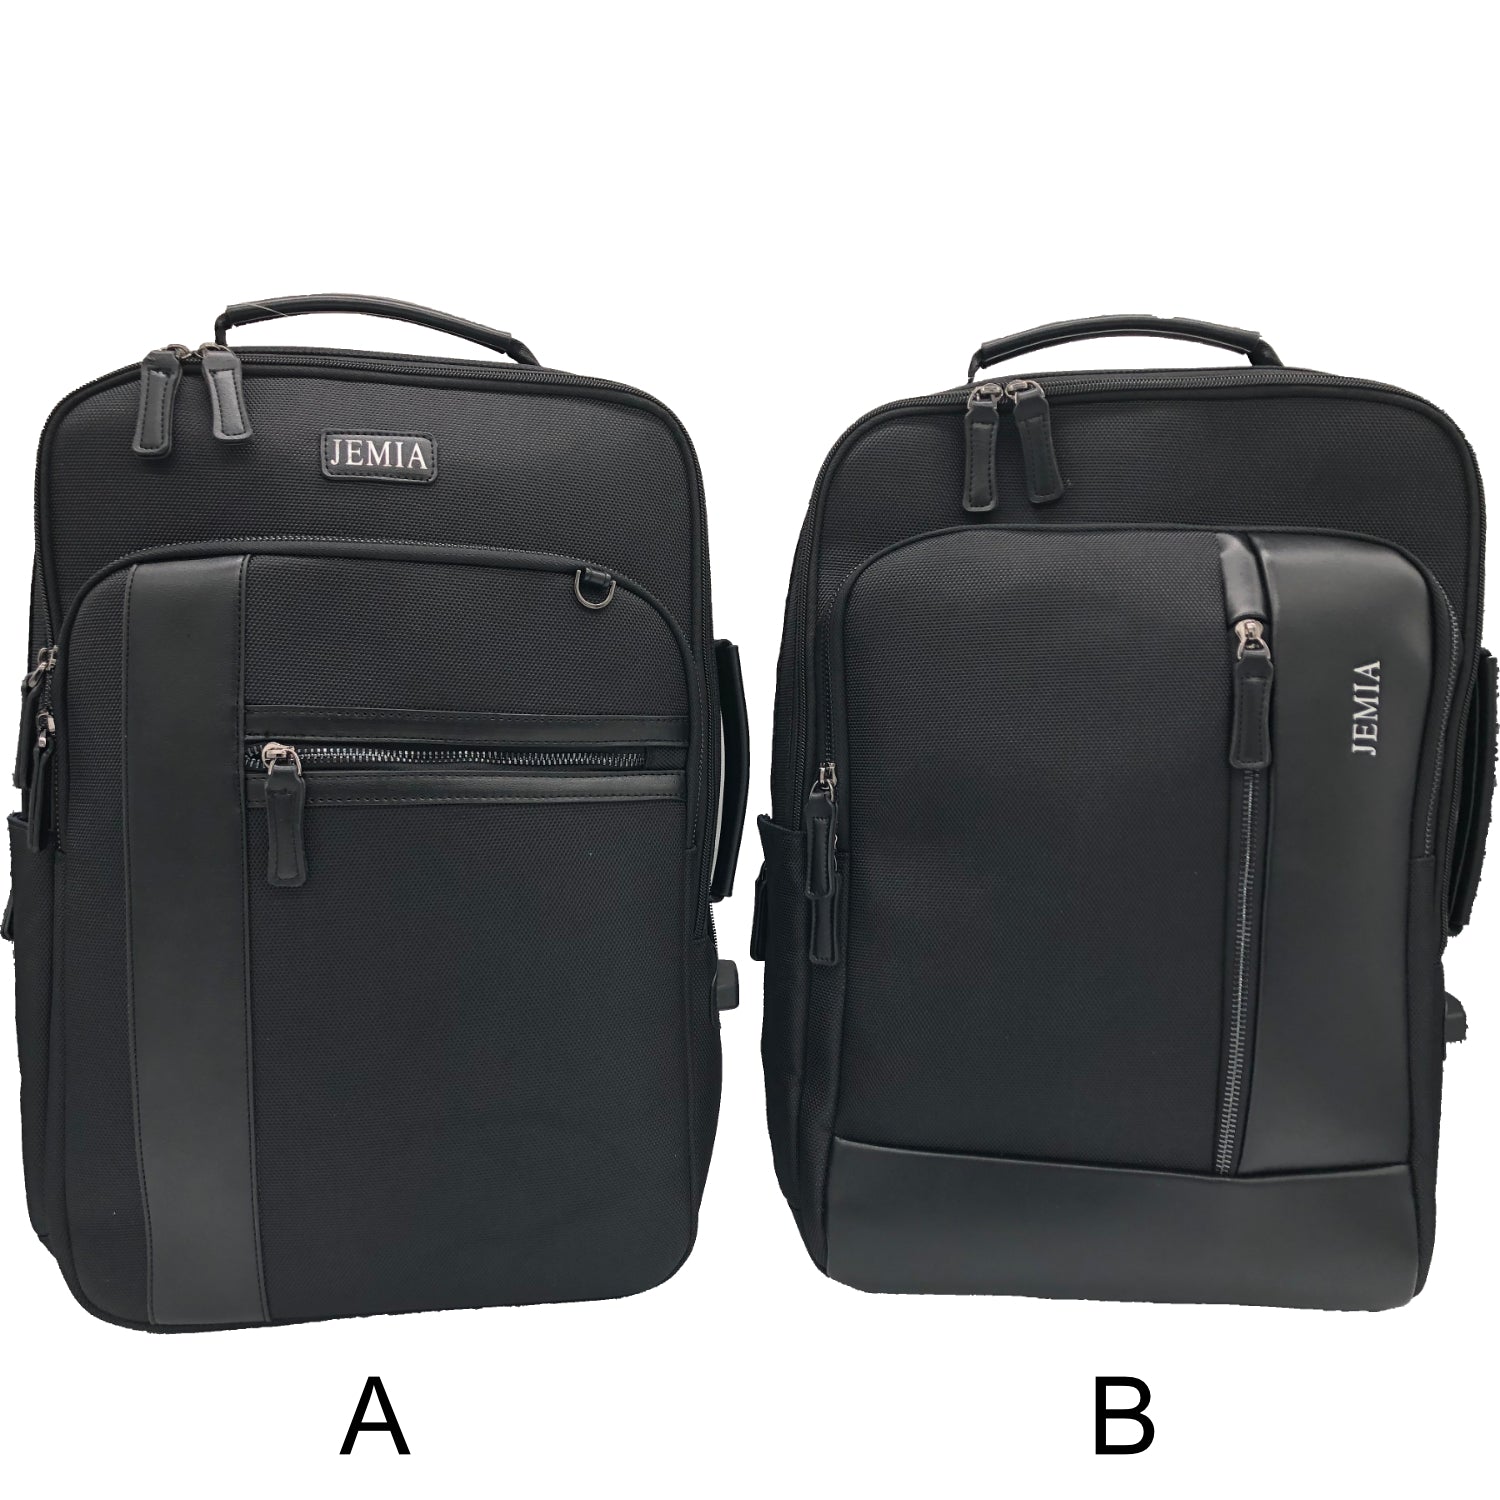 A Quick Survey on upcoming new backpack